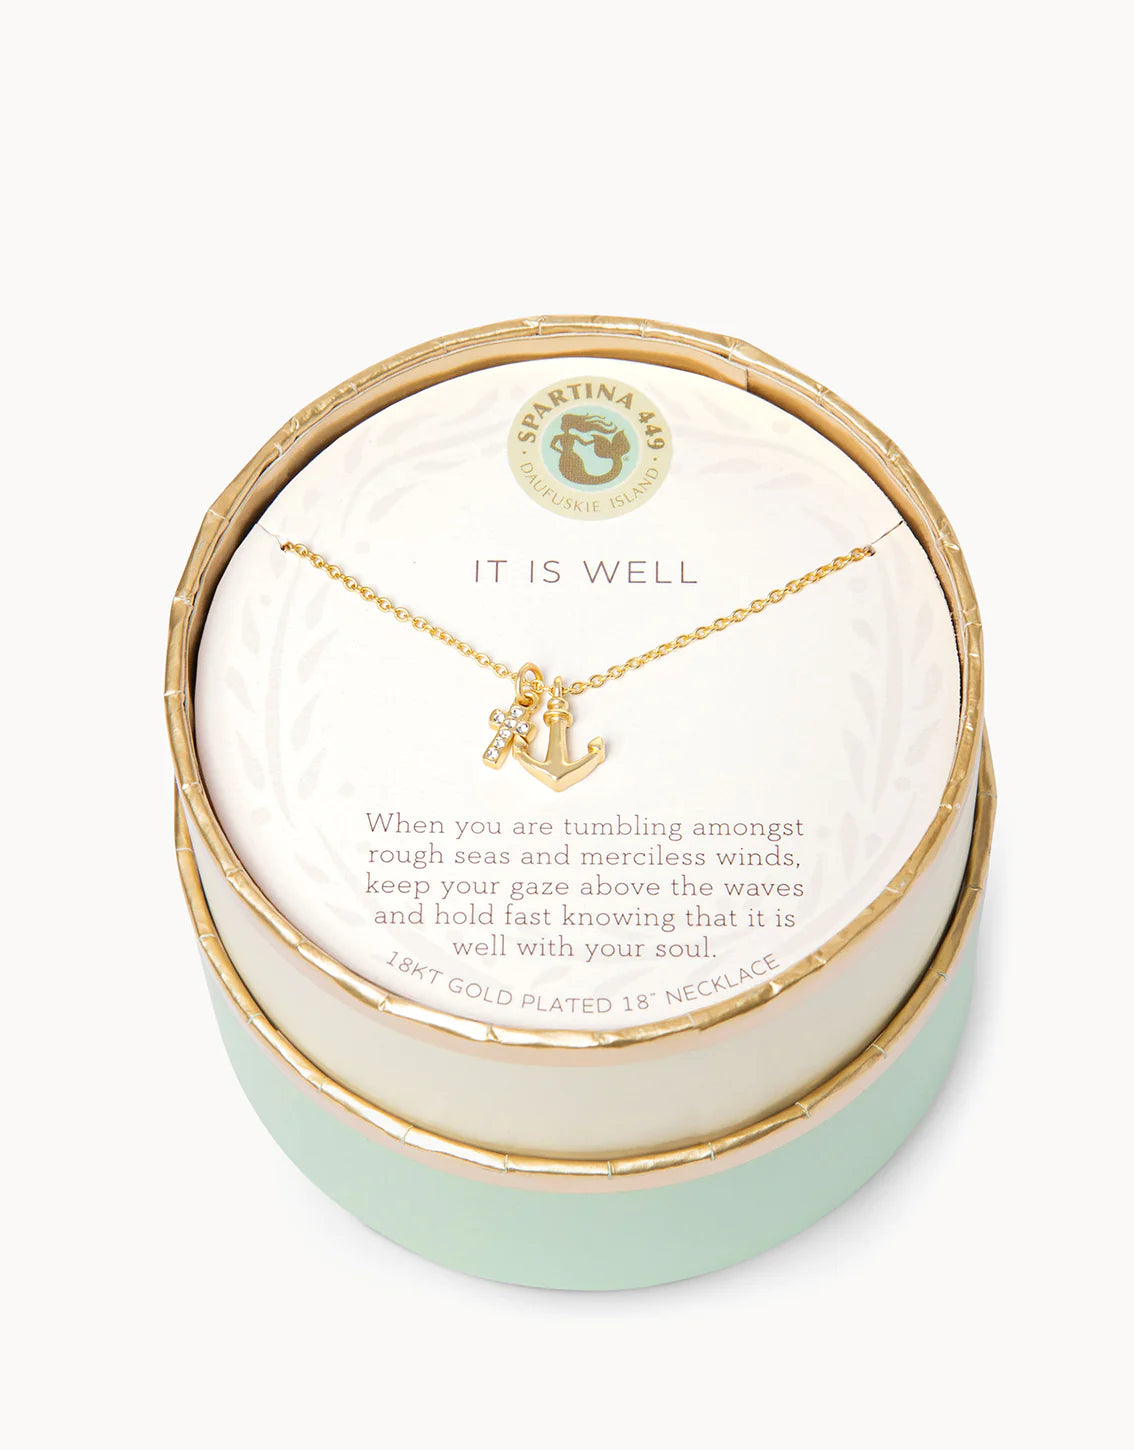 Spartina Sea La Vie Necklace It Is Well/Cross Anchor